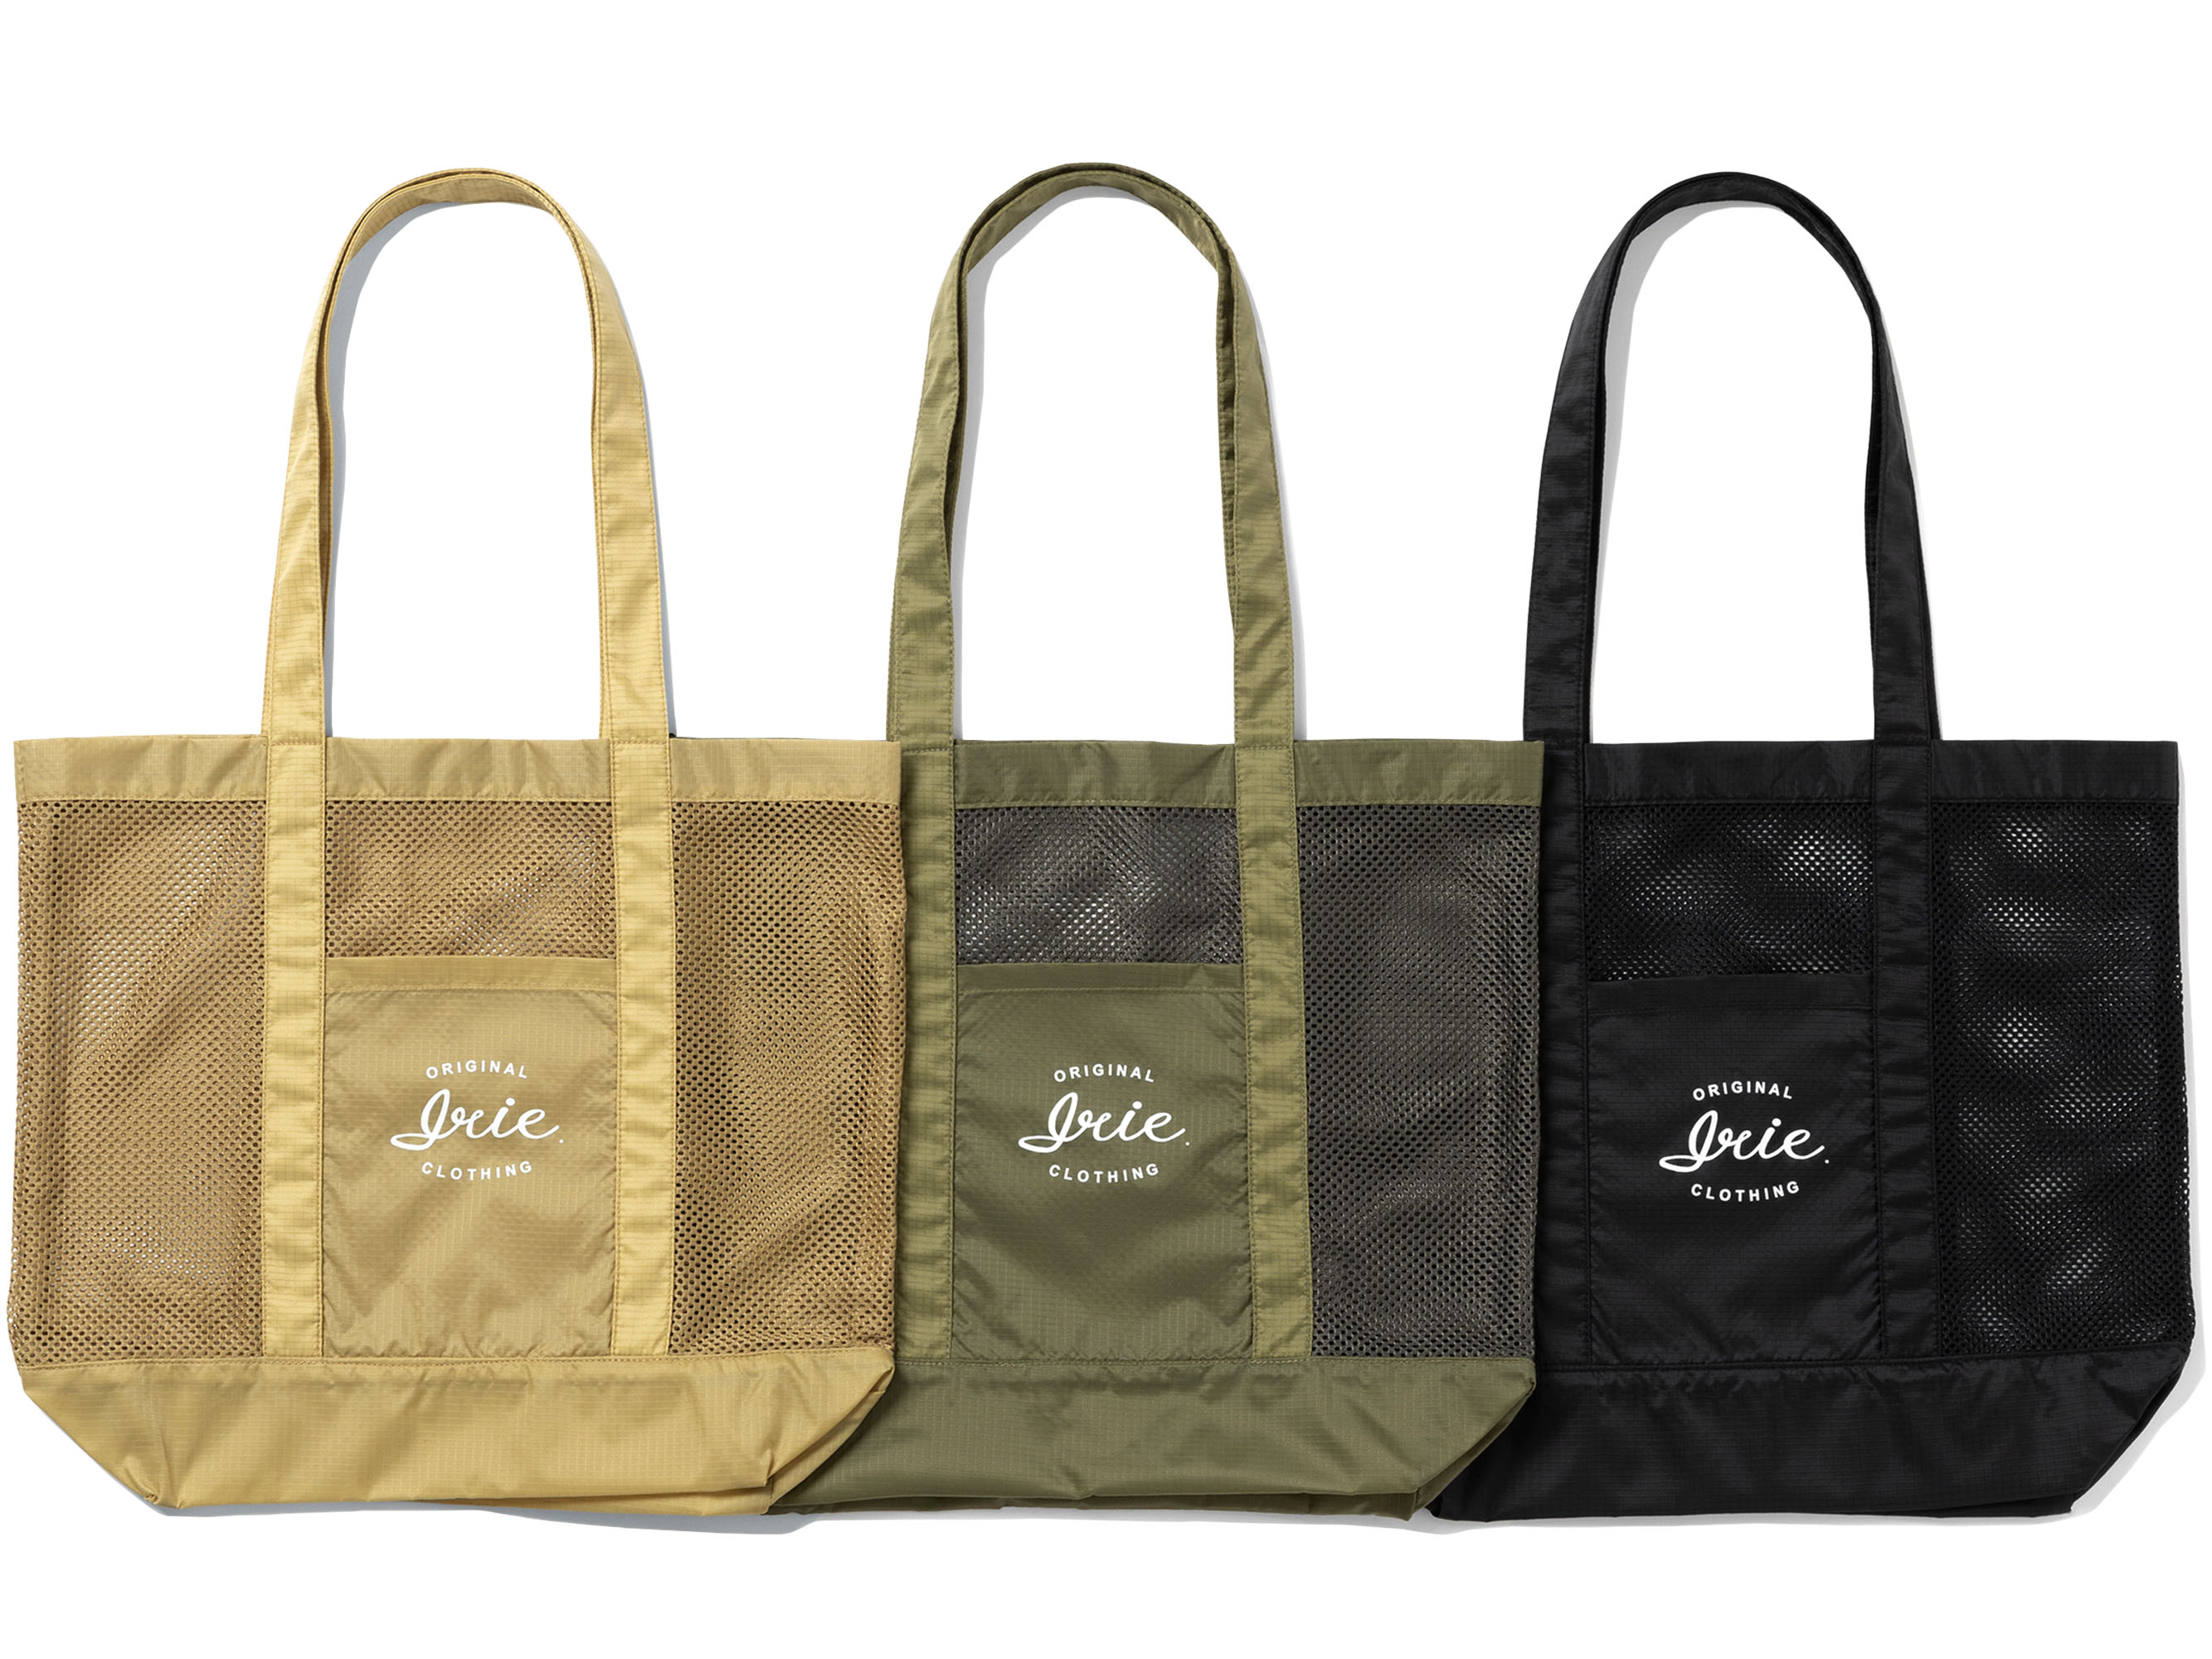 MESH TOTE BAG - IRIE by irielife